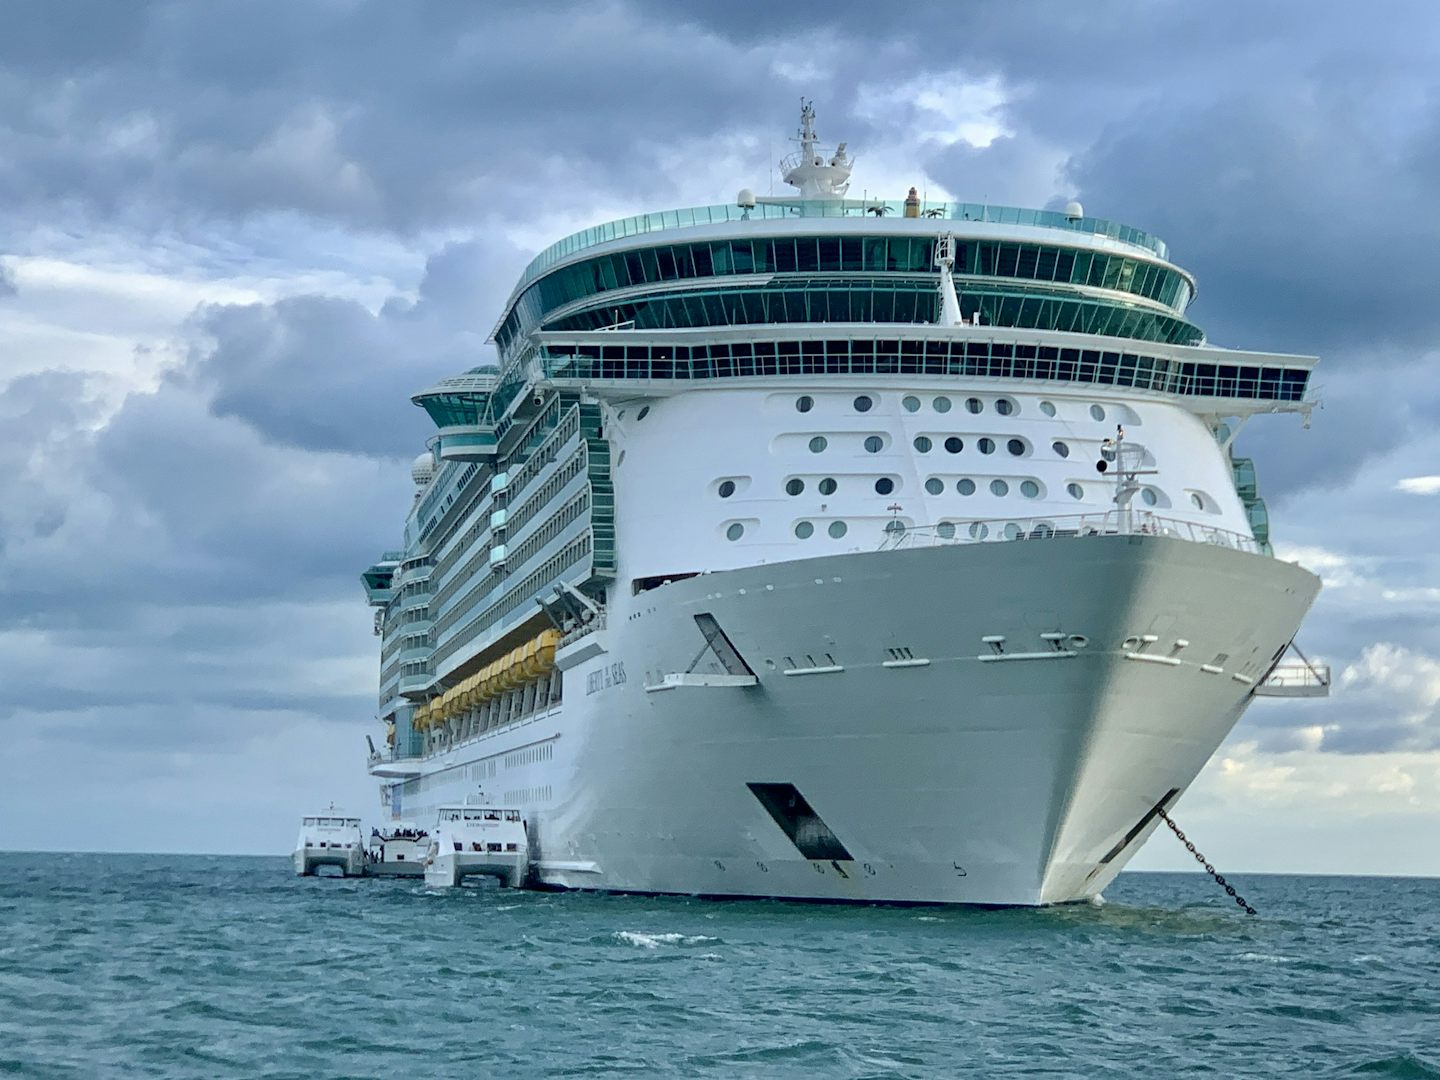 Liberty of the Seas, taken from the tender boat coming back from Belize.